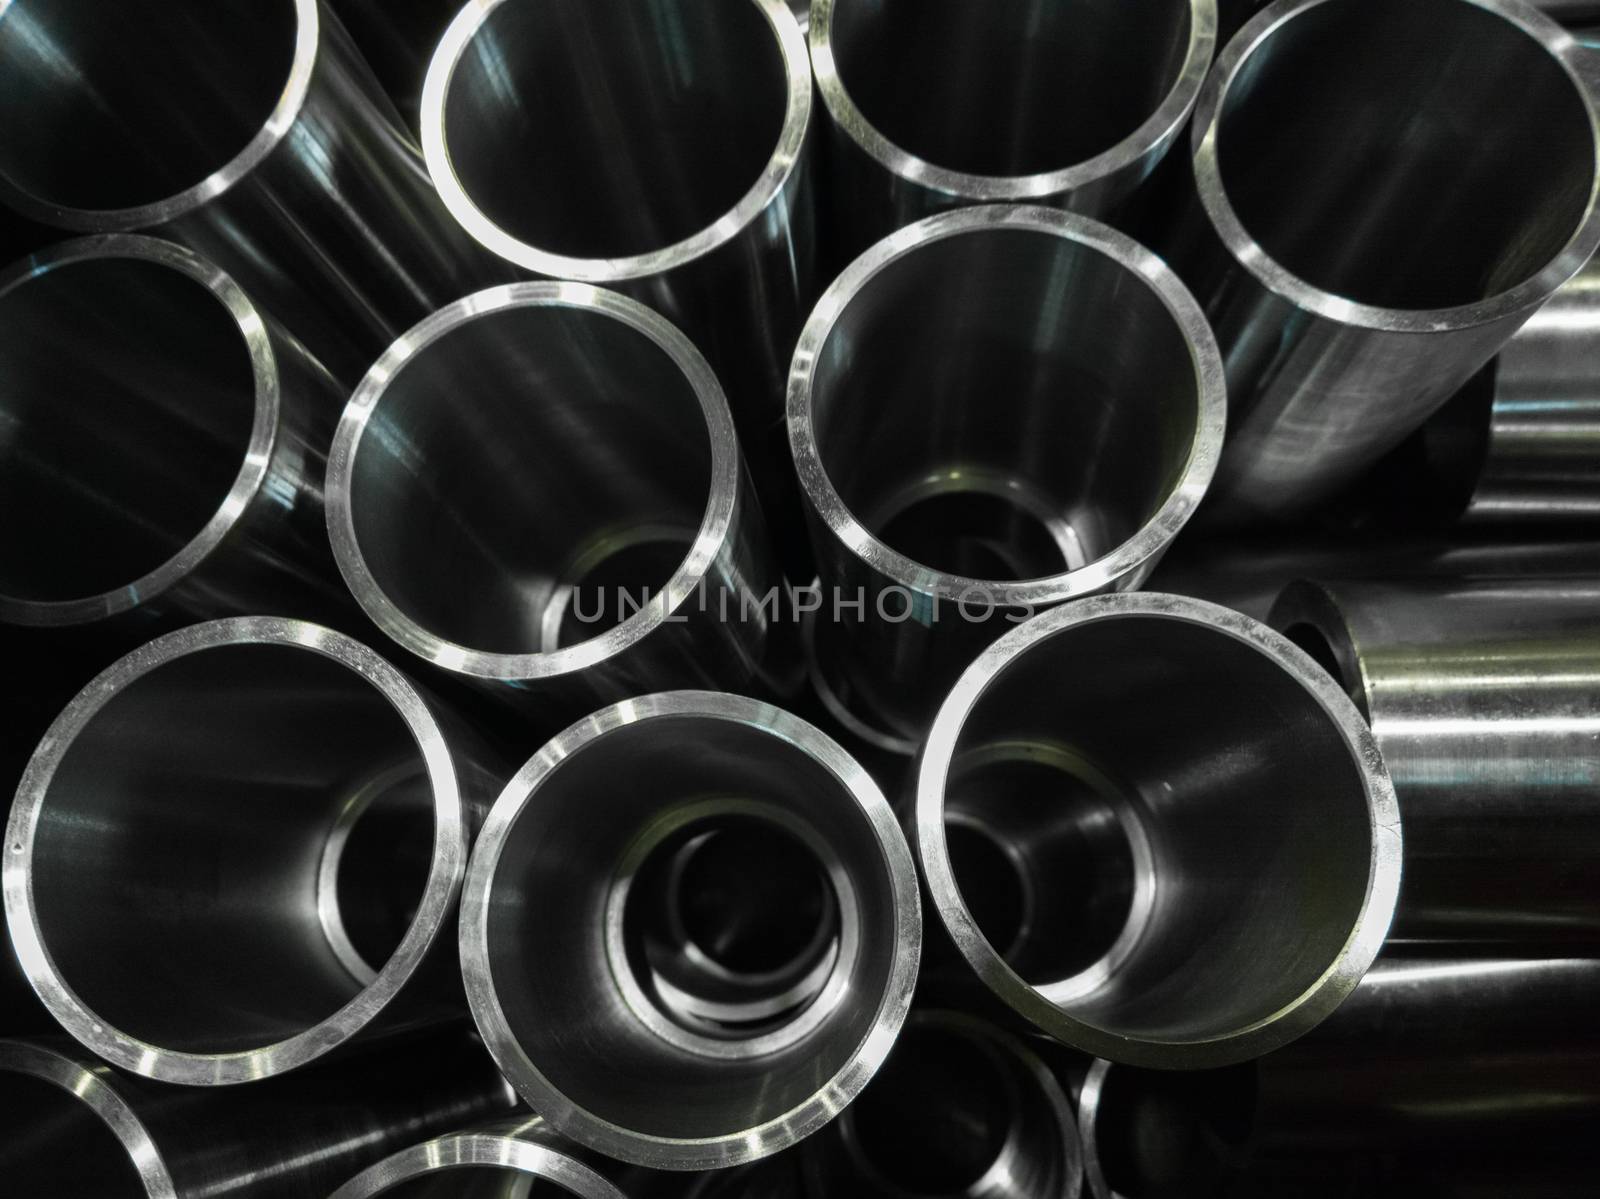 dark industrial background with cnc machined shiny steel pipes - selective focus and lens blur technique